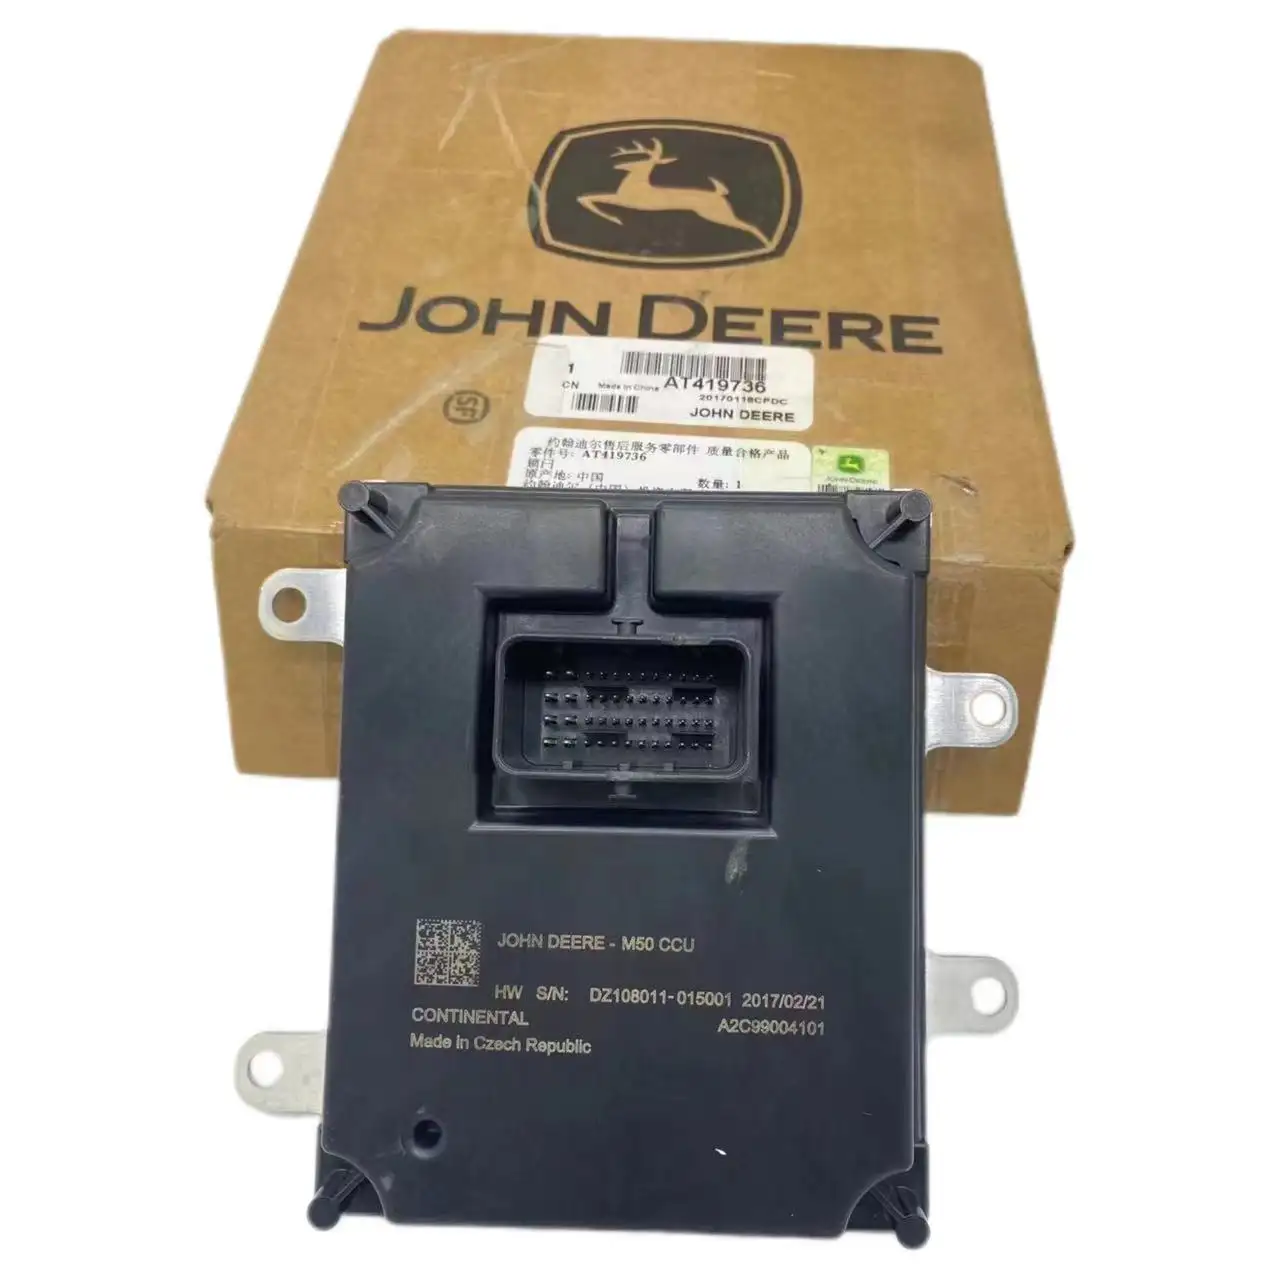 Excavator parts controller for the John Deere AT419736 engine control unit Electronic control unit